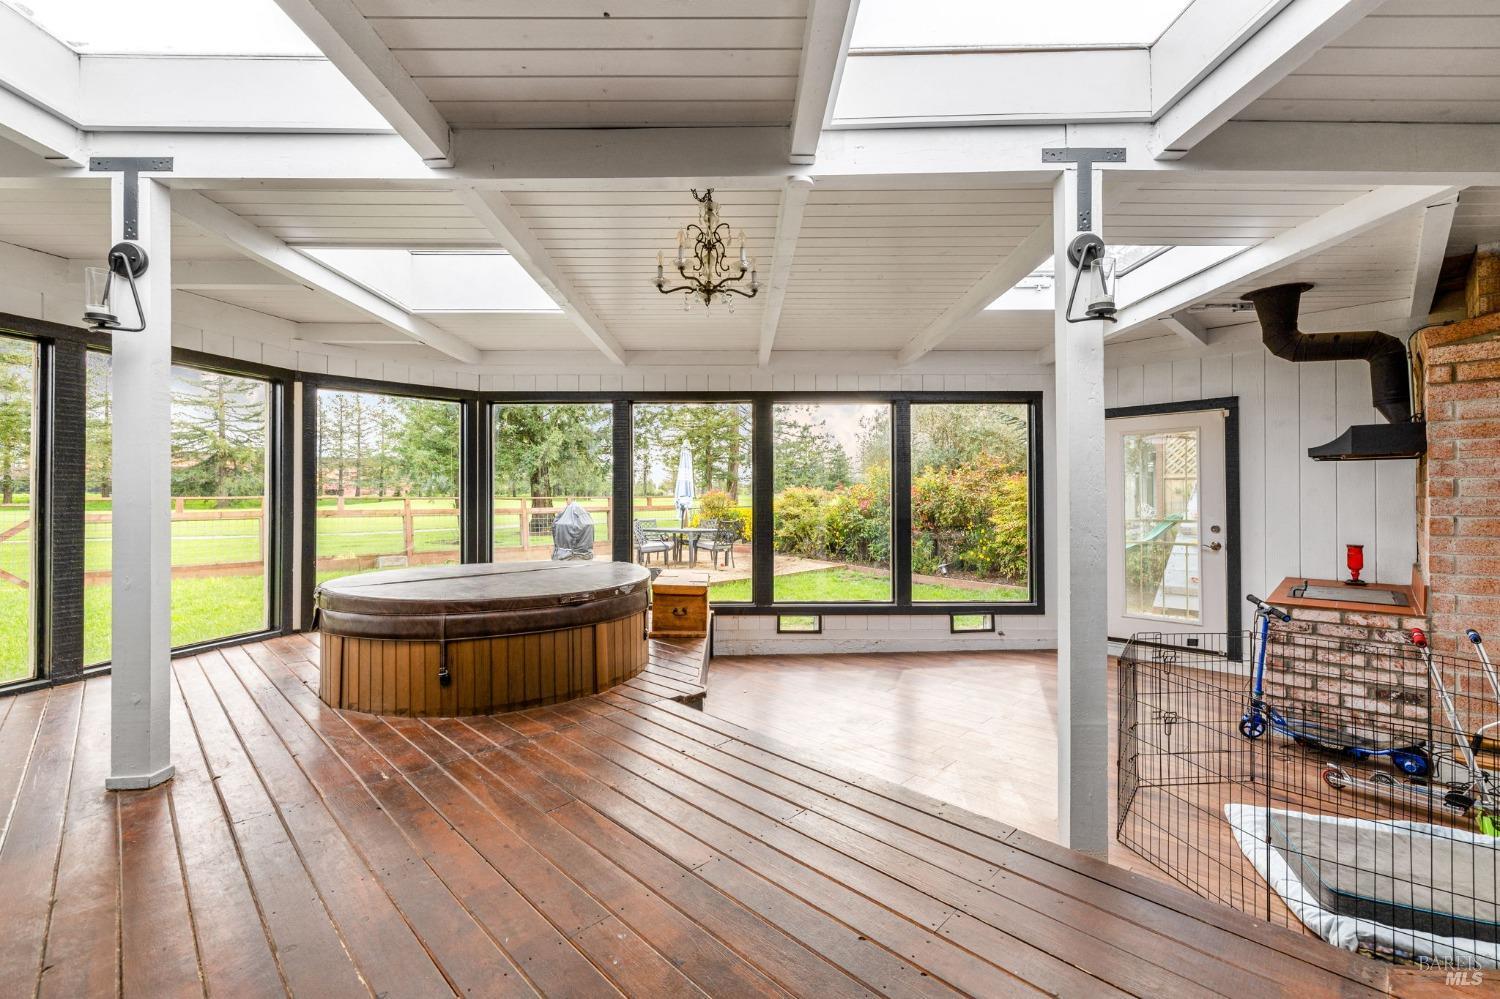 Beautiful enclosed sunroom with a built-in hot tub, and barbeque area.  What a relaxing place to end your day with a spectacular view of the Foxtail North Course.